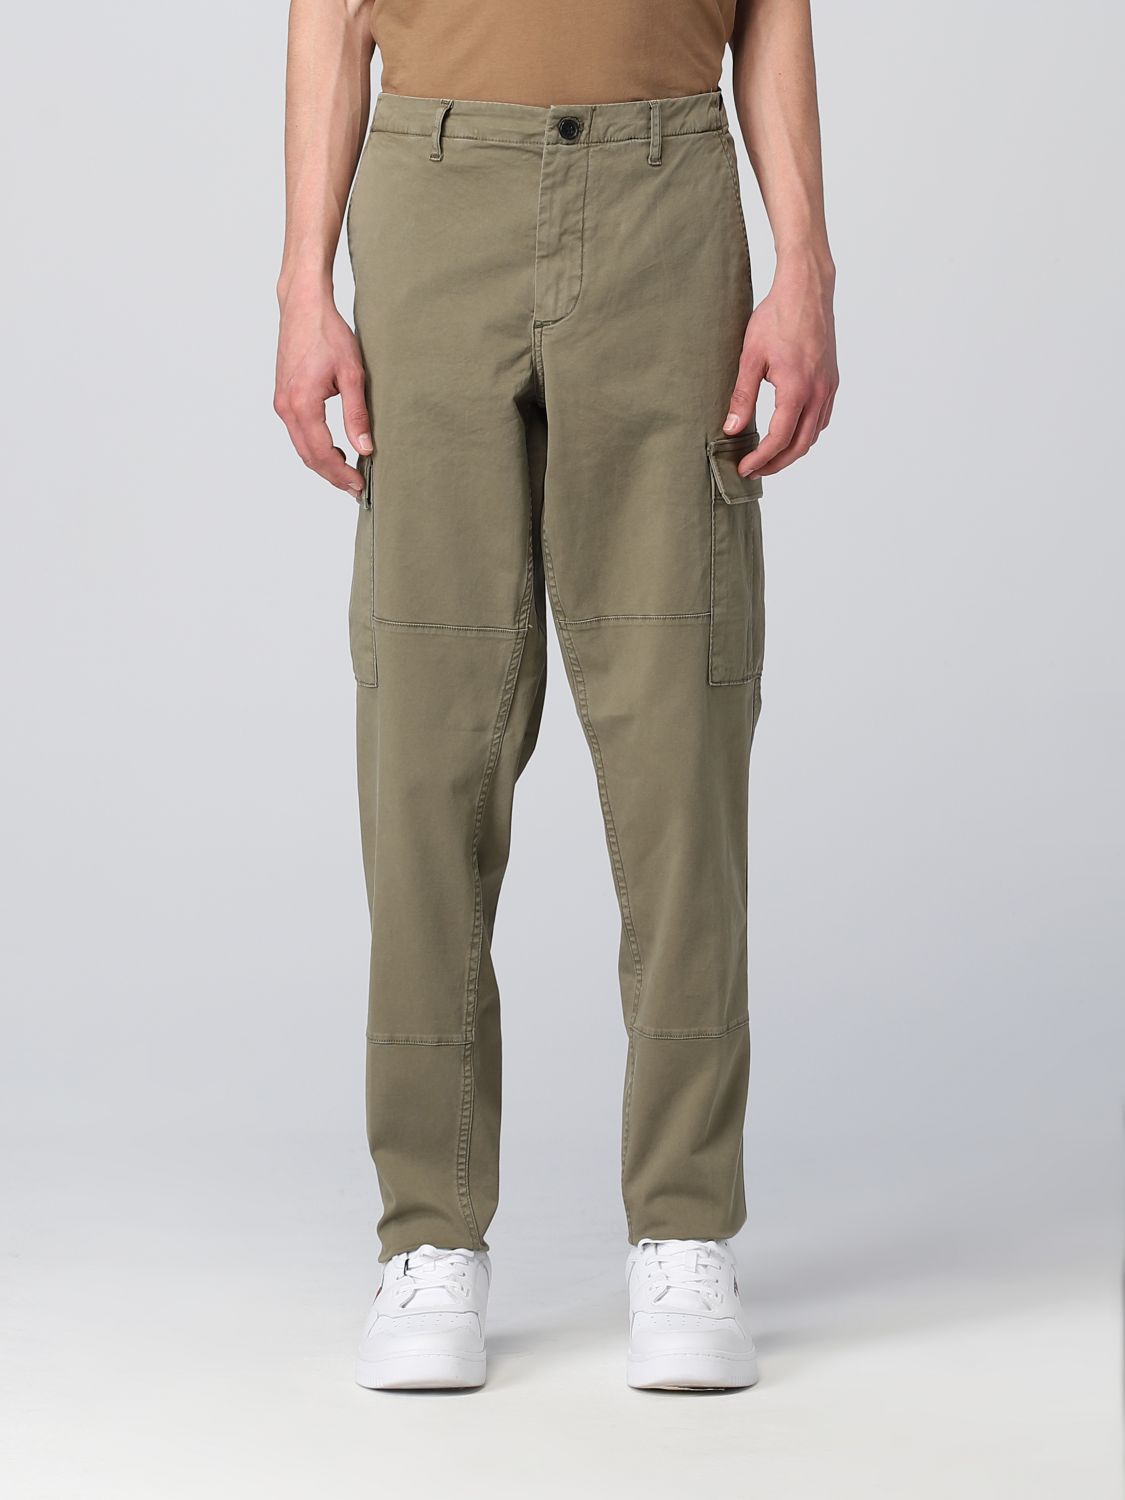 for man - Green | Tommy Hilfiger pants online at GIGLIO.COM